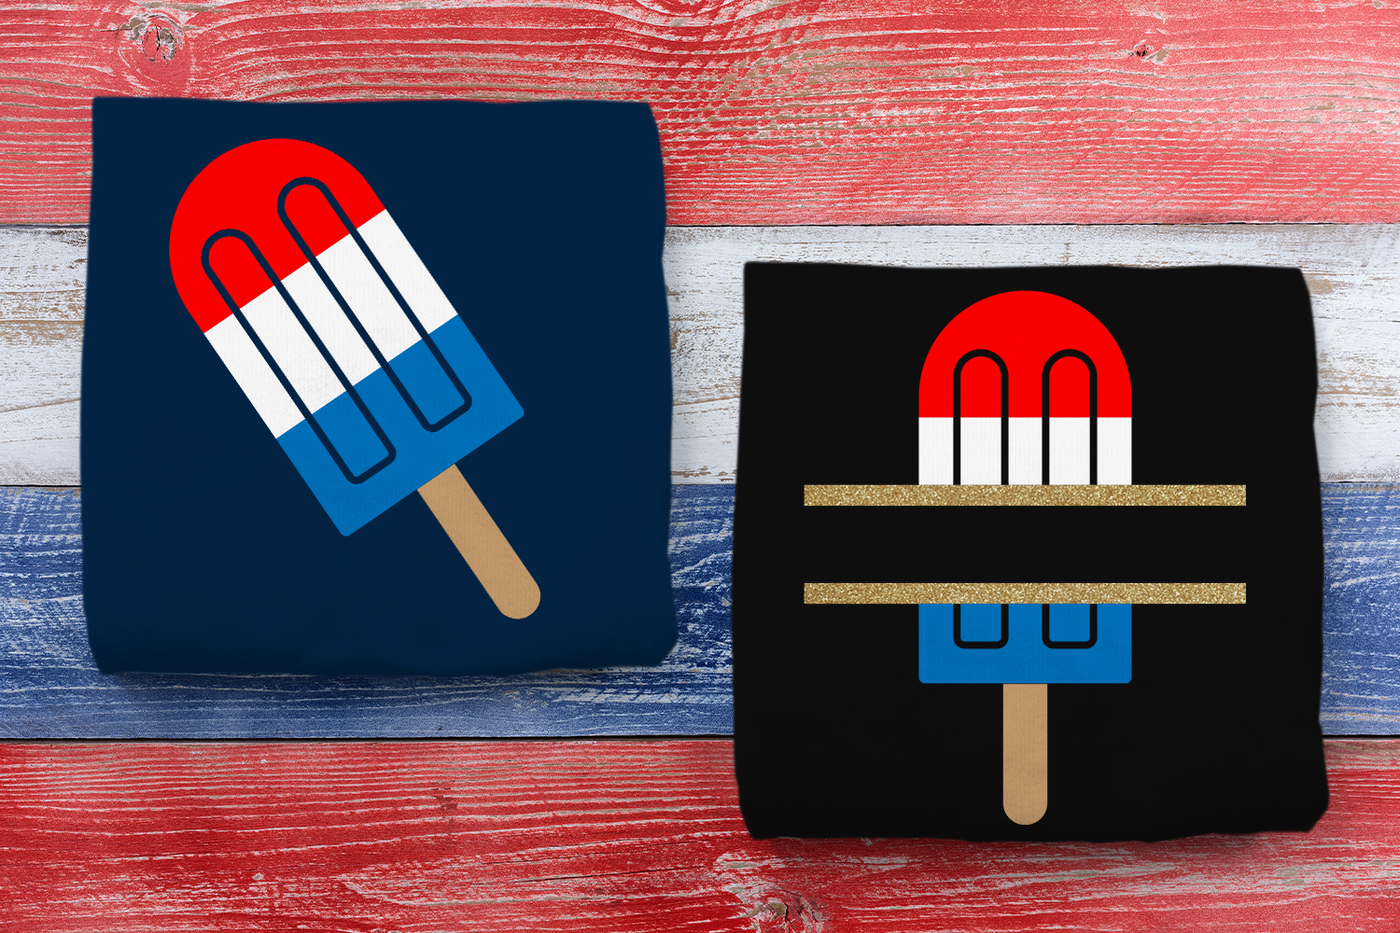 Tri-colored popsicle designs show in red white and blue. Both are shown on folded shirts. The design on the right has a split in the middle for adding your own text.